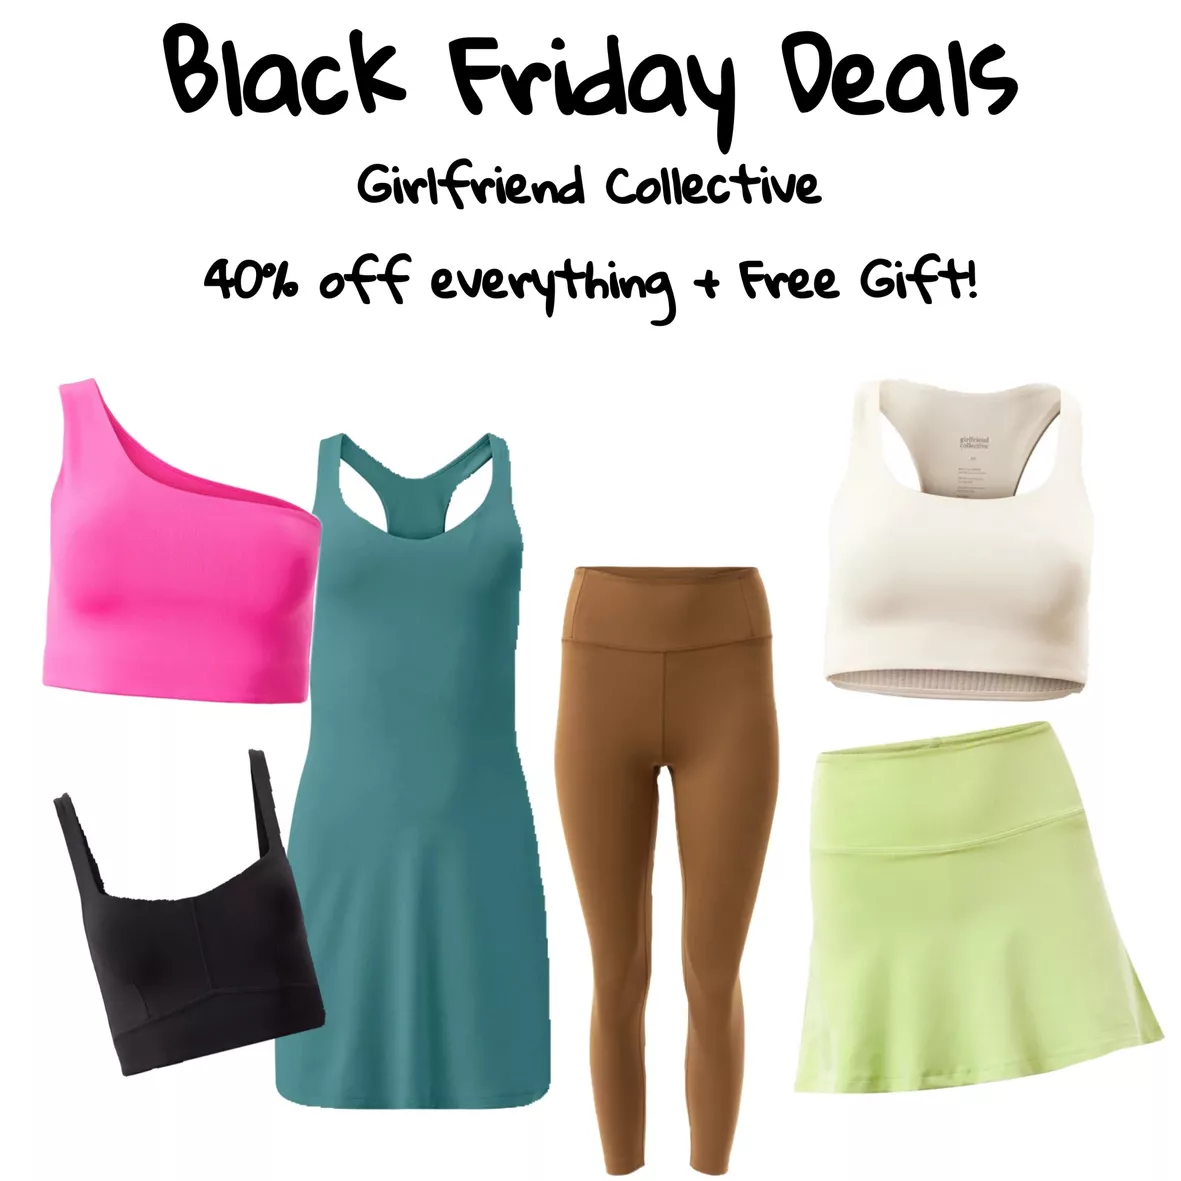 Girlfriend Collective Black Friday Deal: What To Know